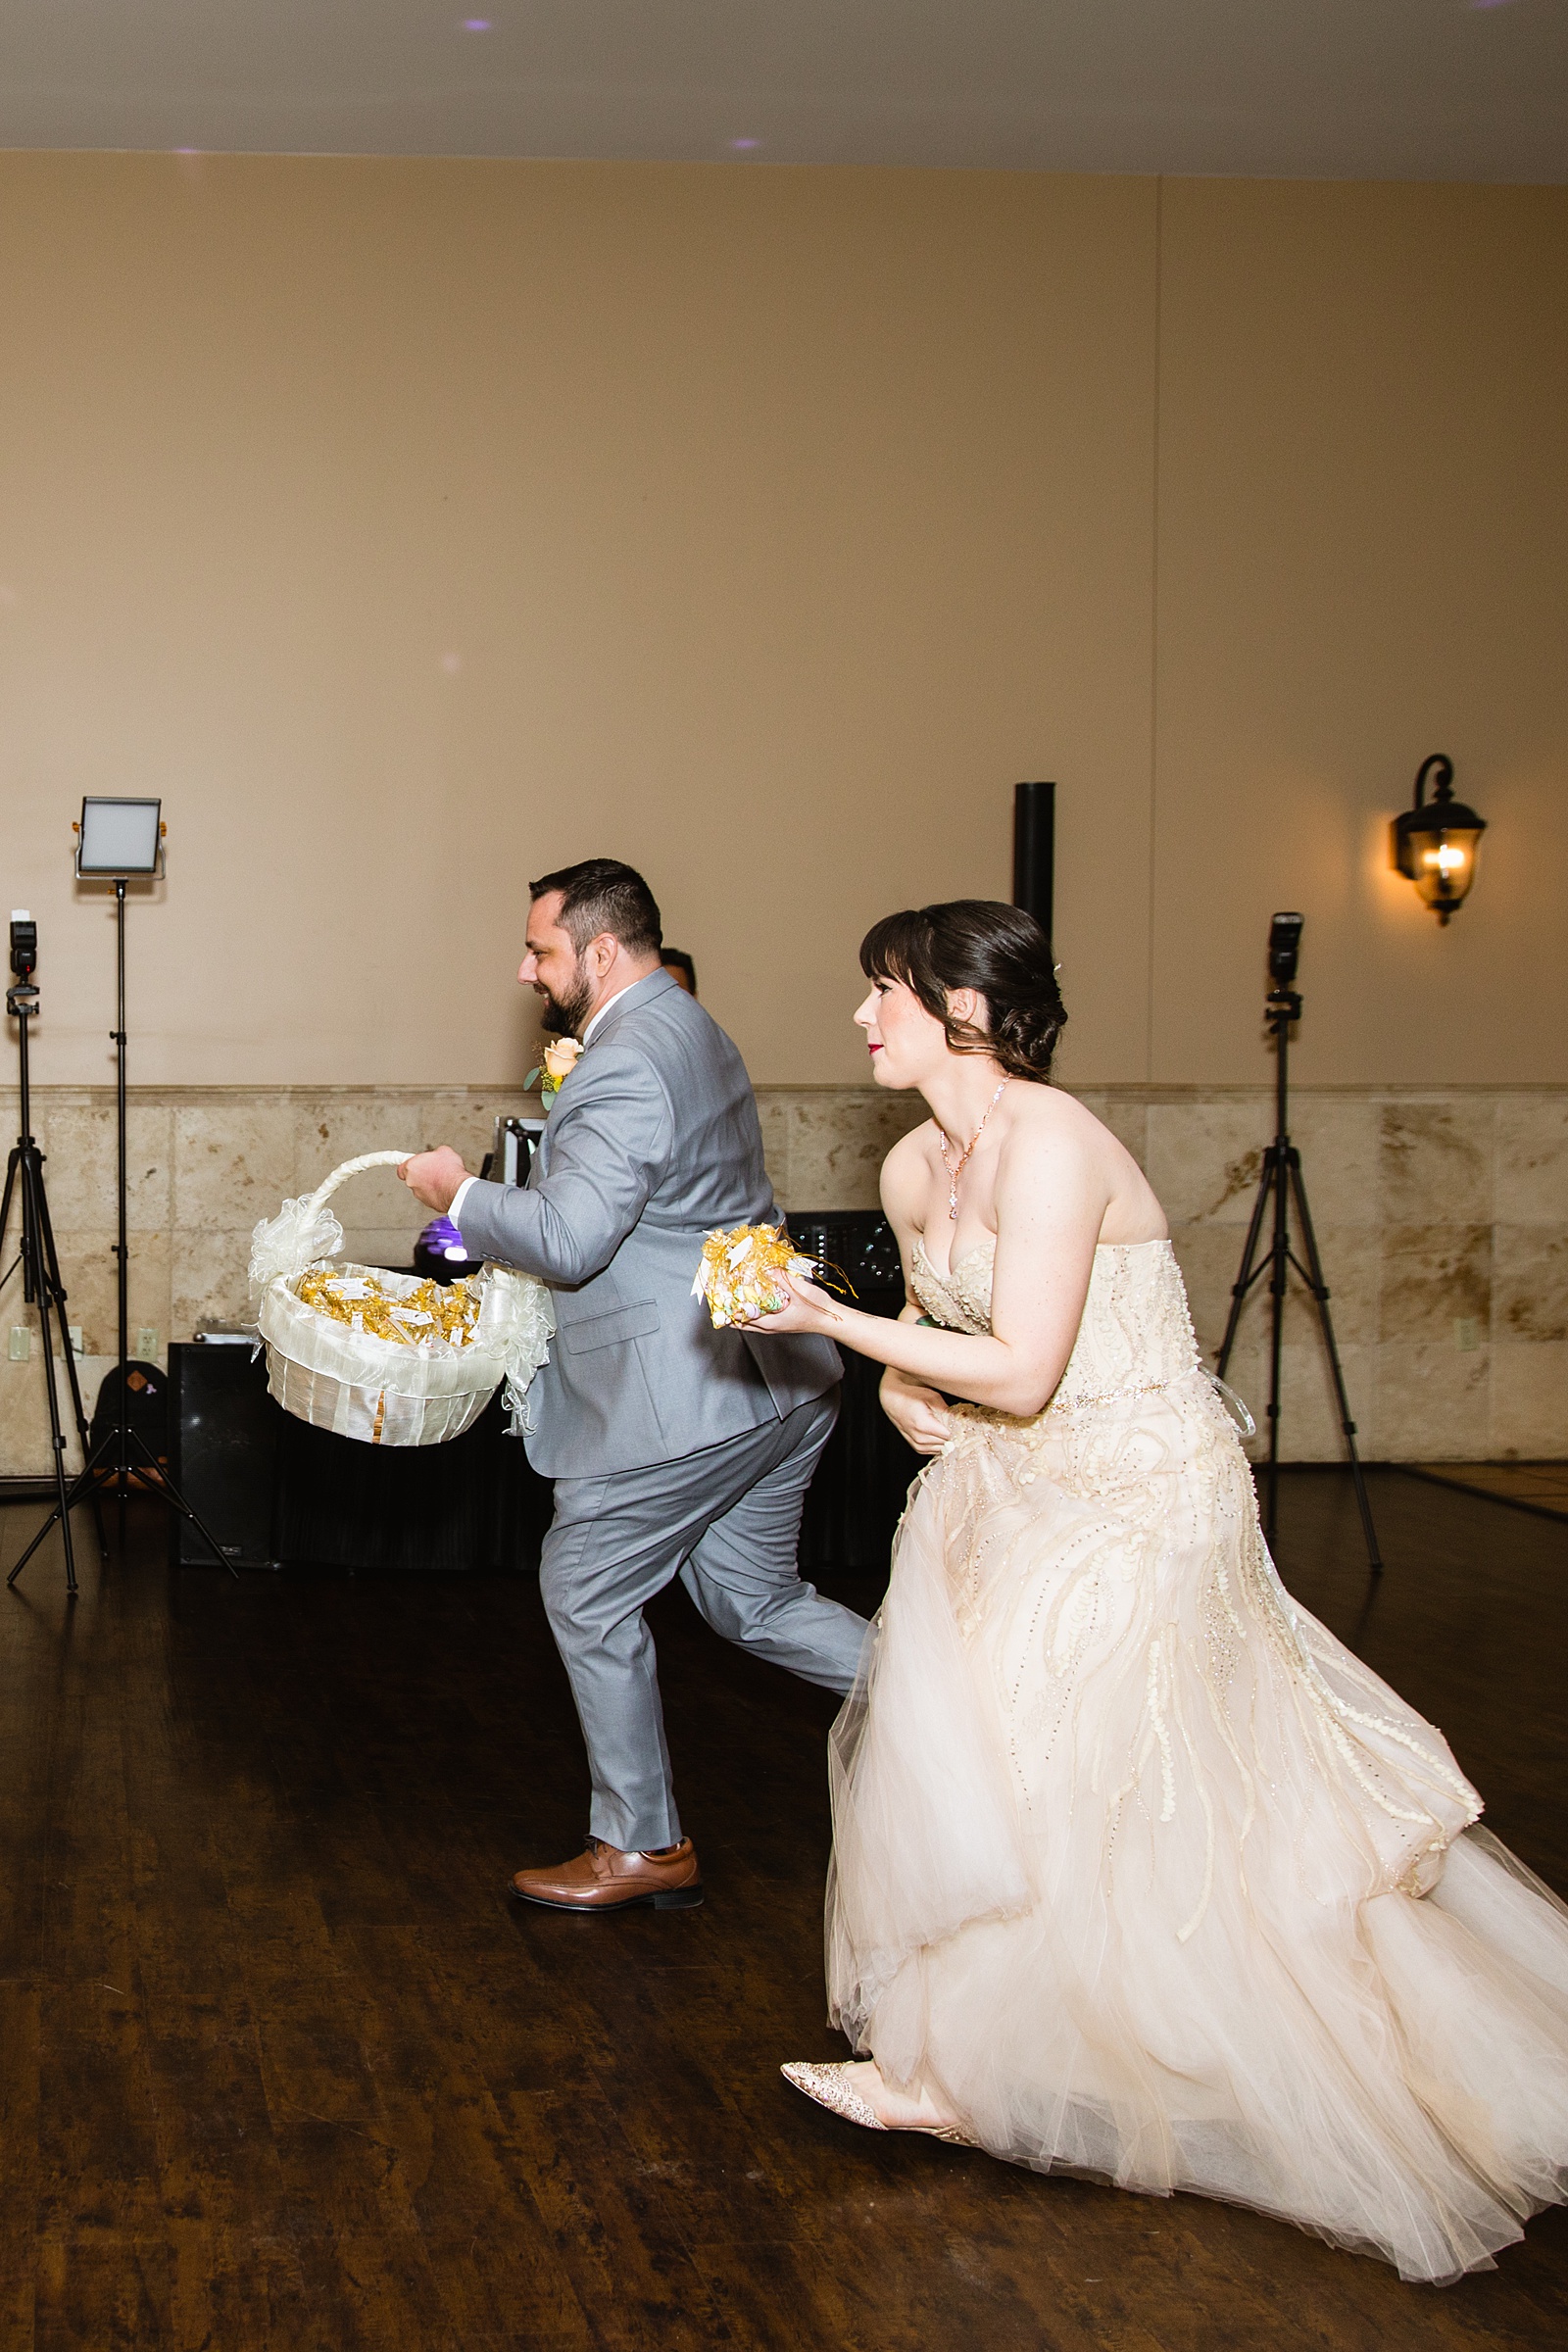 Bride and groom race to guest tables to give out favors and take pictures with each table at a Bella Rose Estate wedding reception by Arizona photographers PMA Photography.